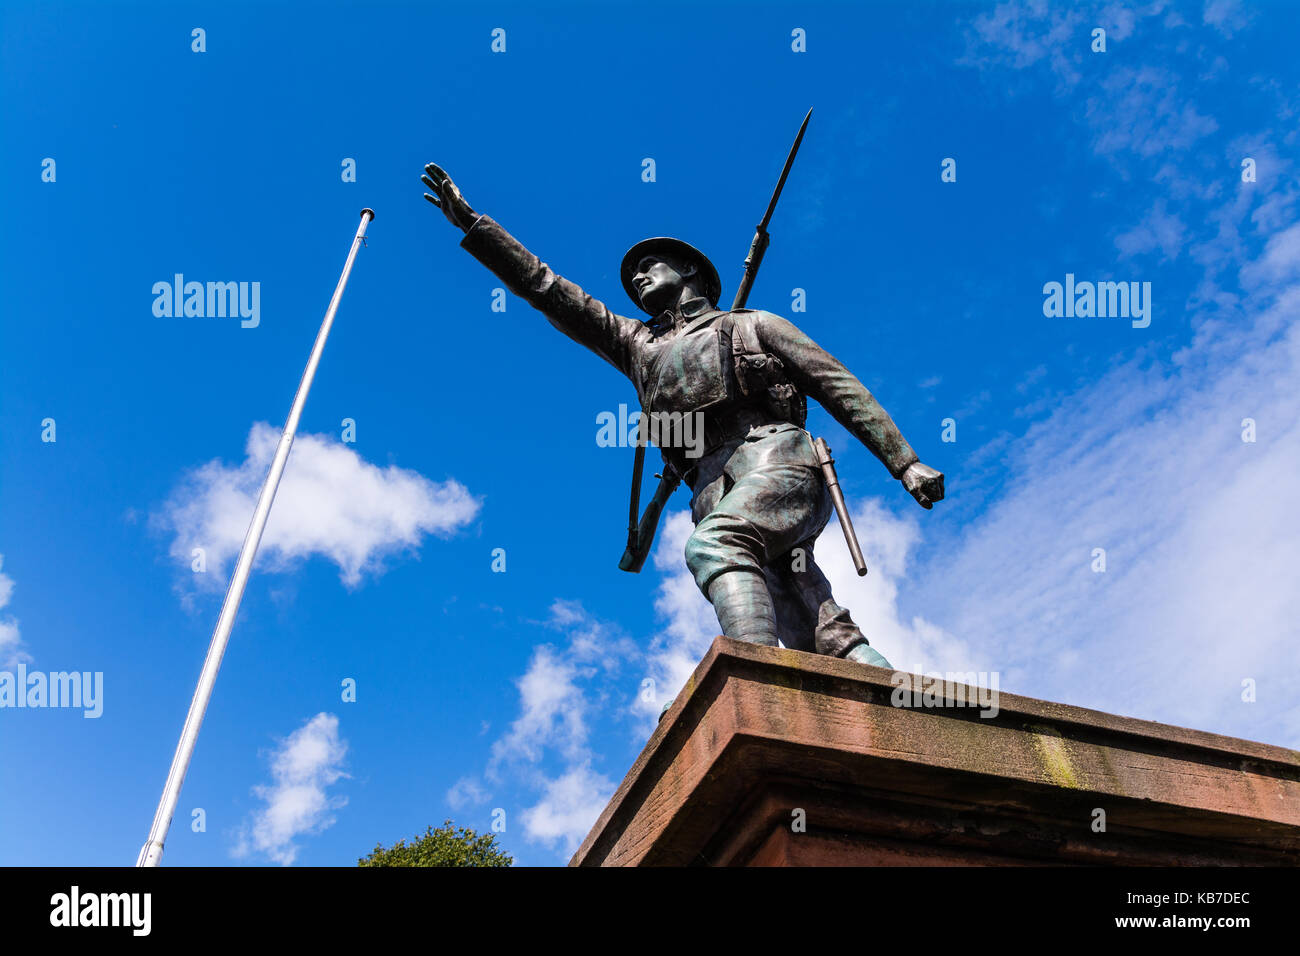 War memorial. Bronze statue of a ww1 soldier reaching forward, bayonet rifle on his back. Castle Grounds, Bridgnorth, Shropshire, UK. Stock Photo